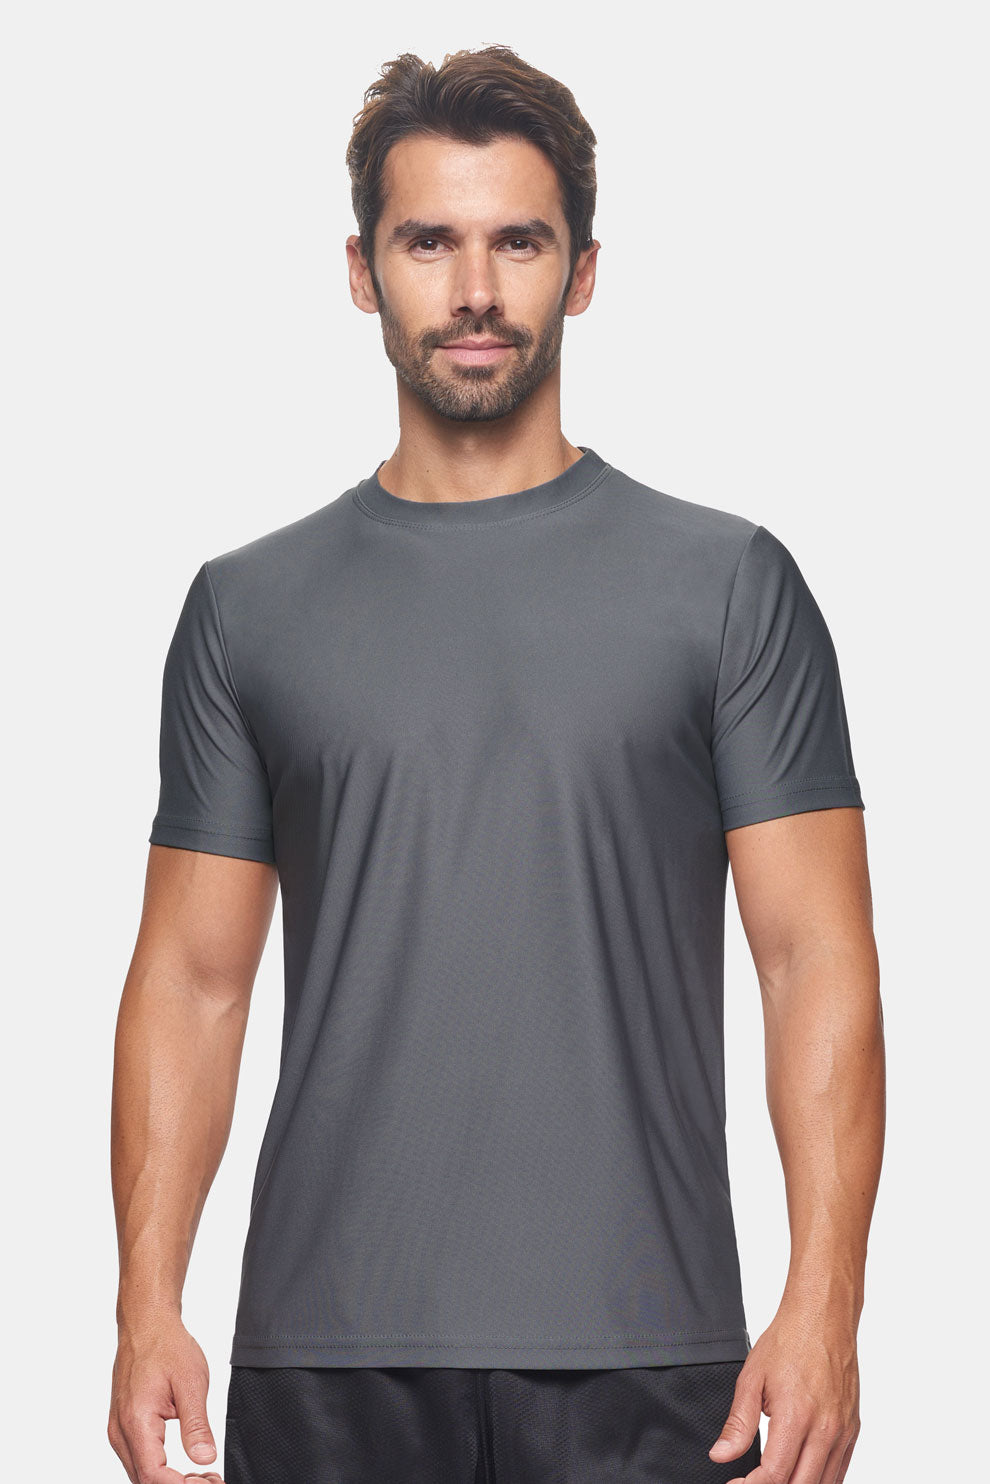 EcoTek Recycled Performance Tee Expert Brand Apparel#color_charcoal